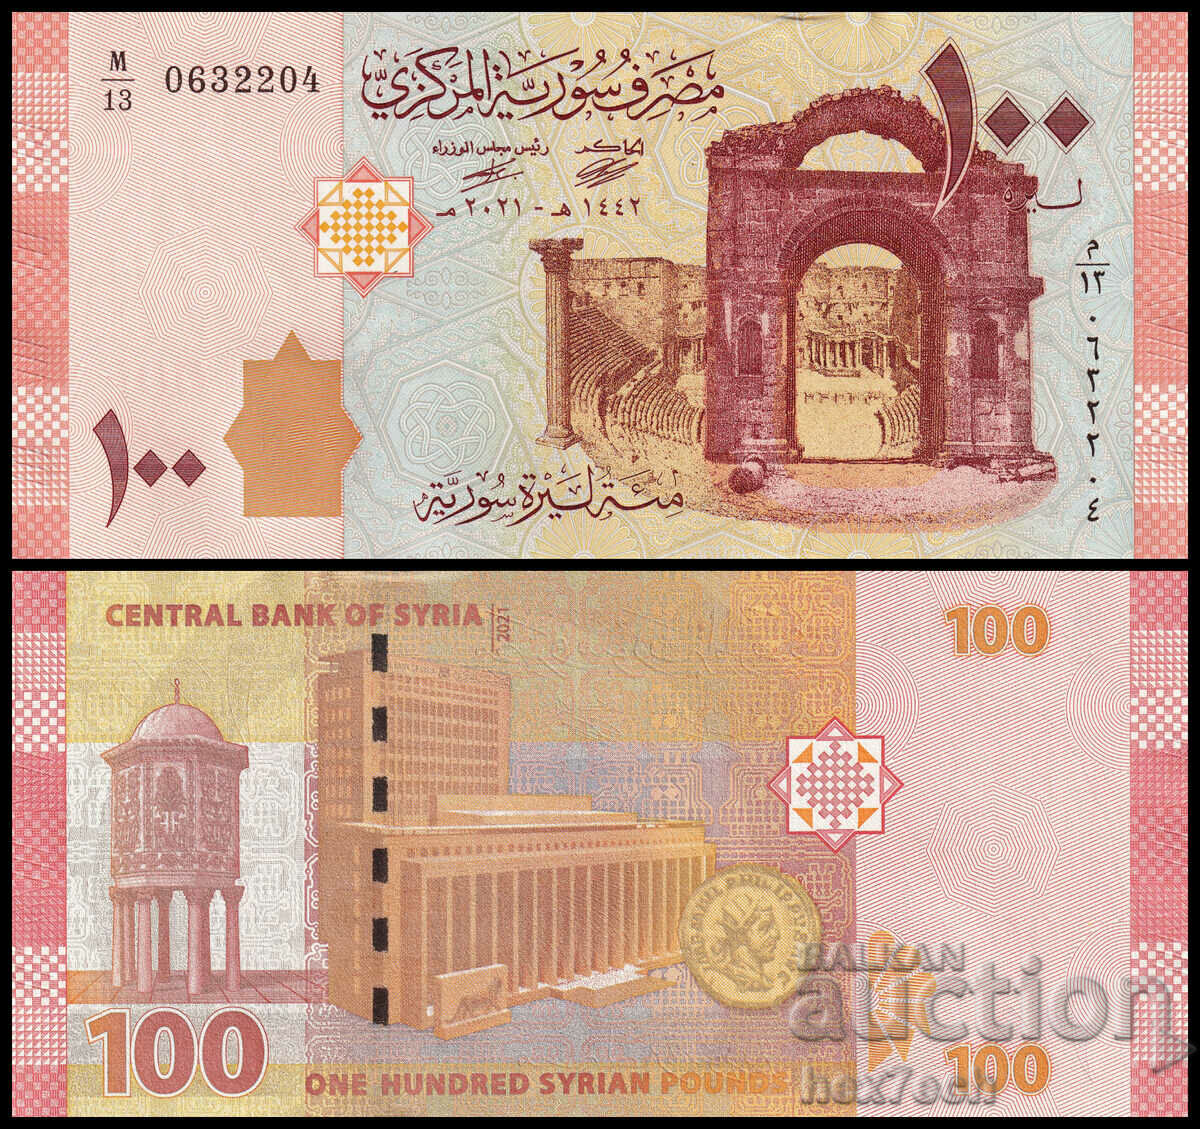 ❤️ ⭐ Syria 2021 100 pounds UNC new ⭐ ❤️